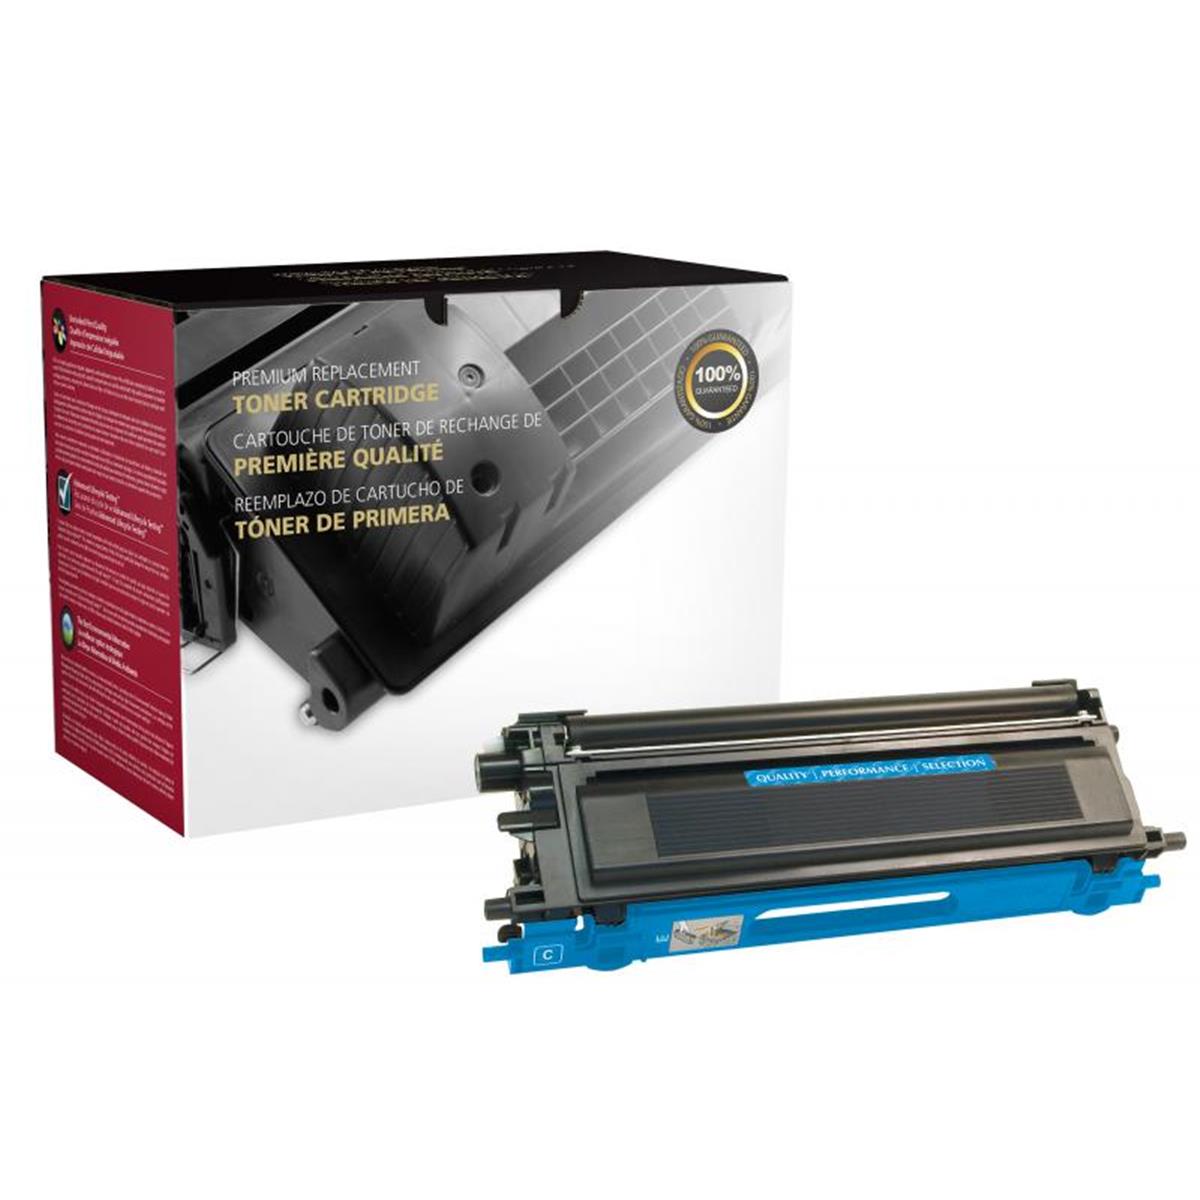 Picture of Brother 200466 High Yield Cyan Toner Cartridge for TN115